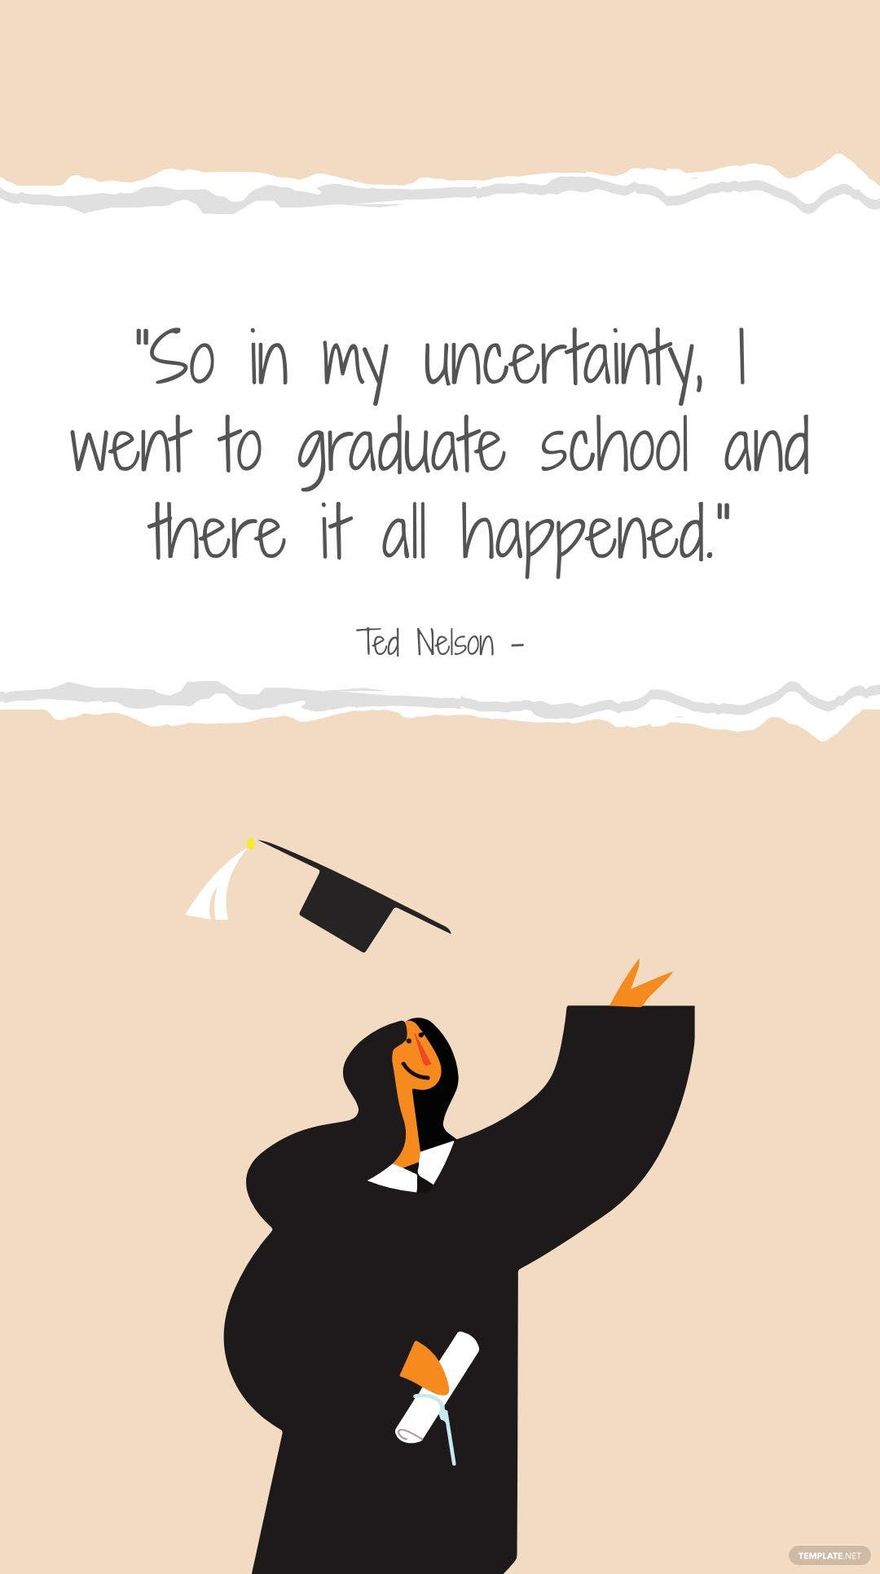 Free Ted Nelson - So in my uncertainty, I went to graduate school and there it all happened.